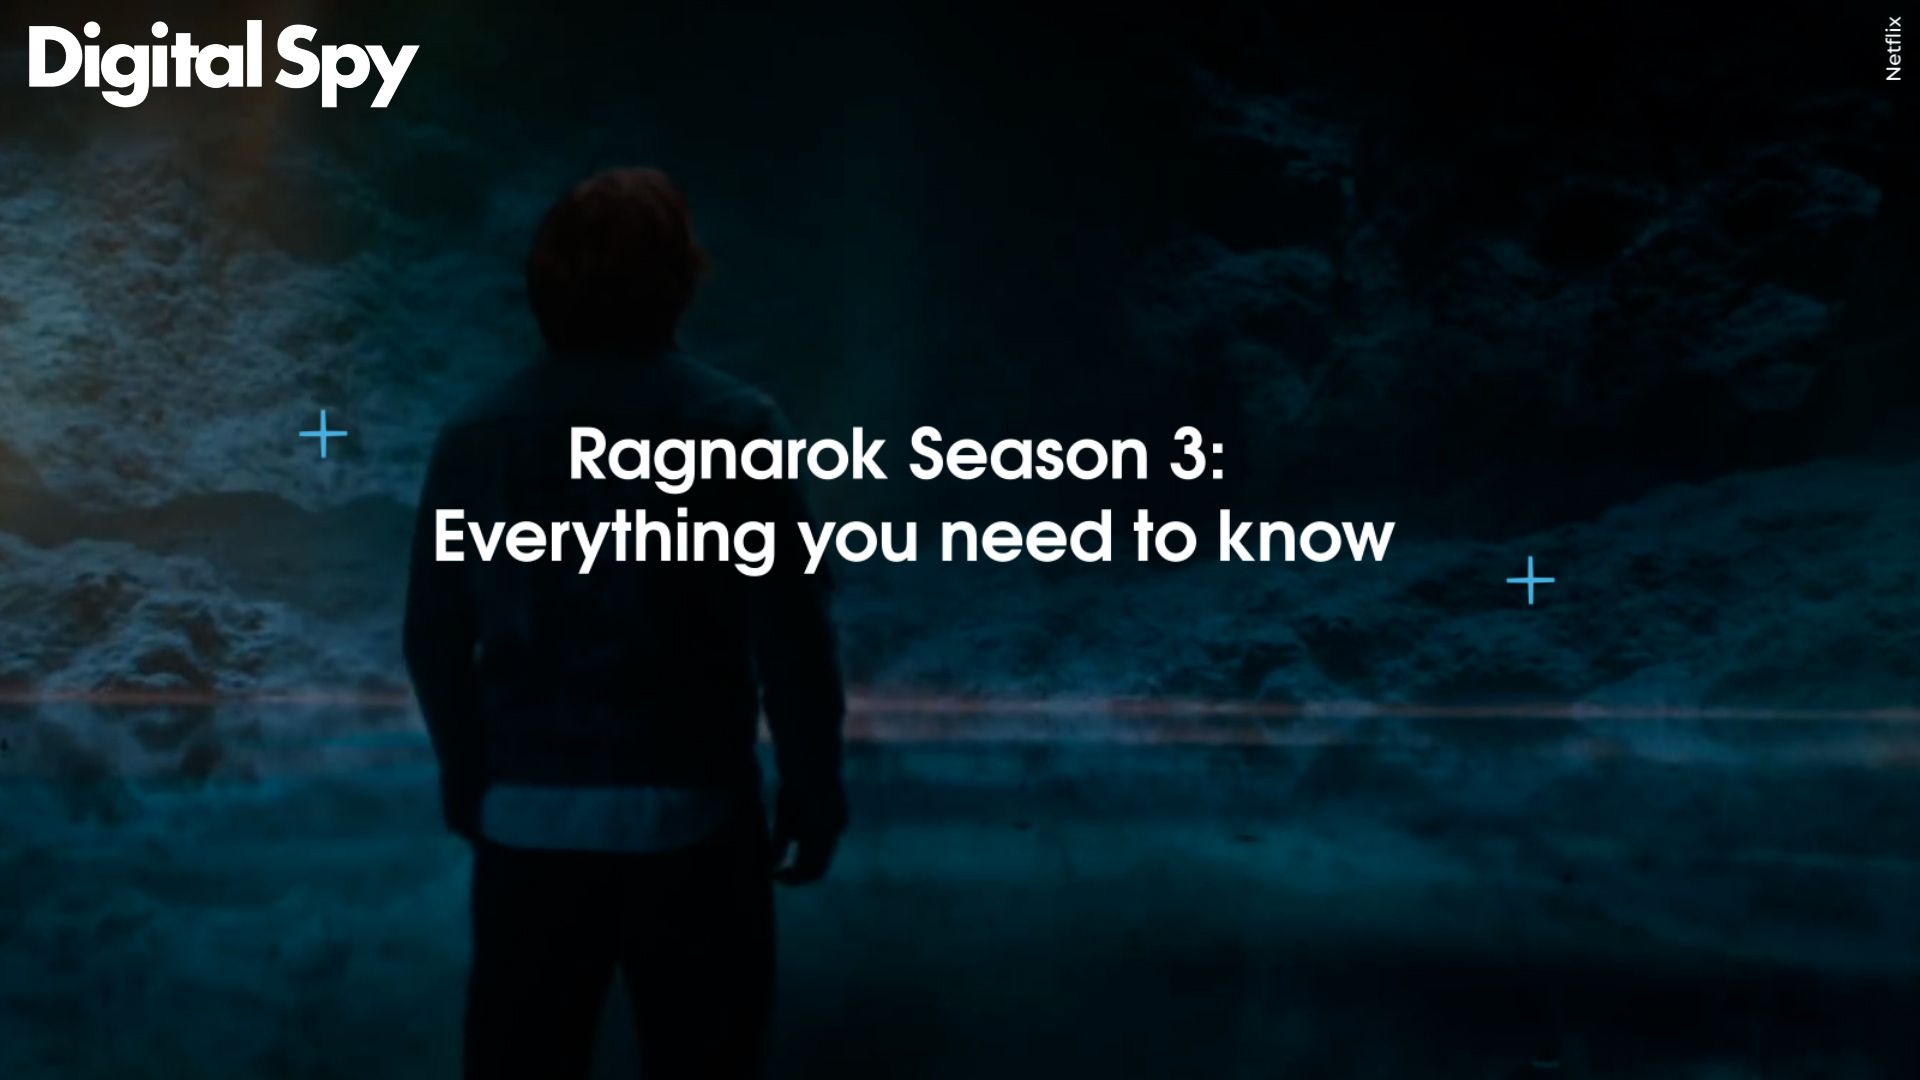 Record of Ragnarok season 3 potential release date, what to expect